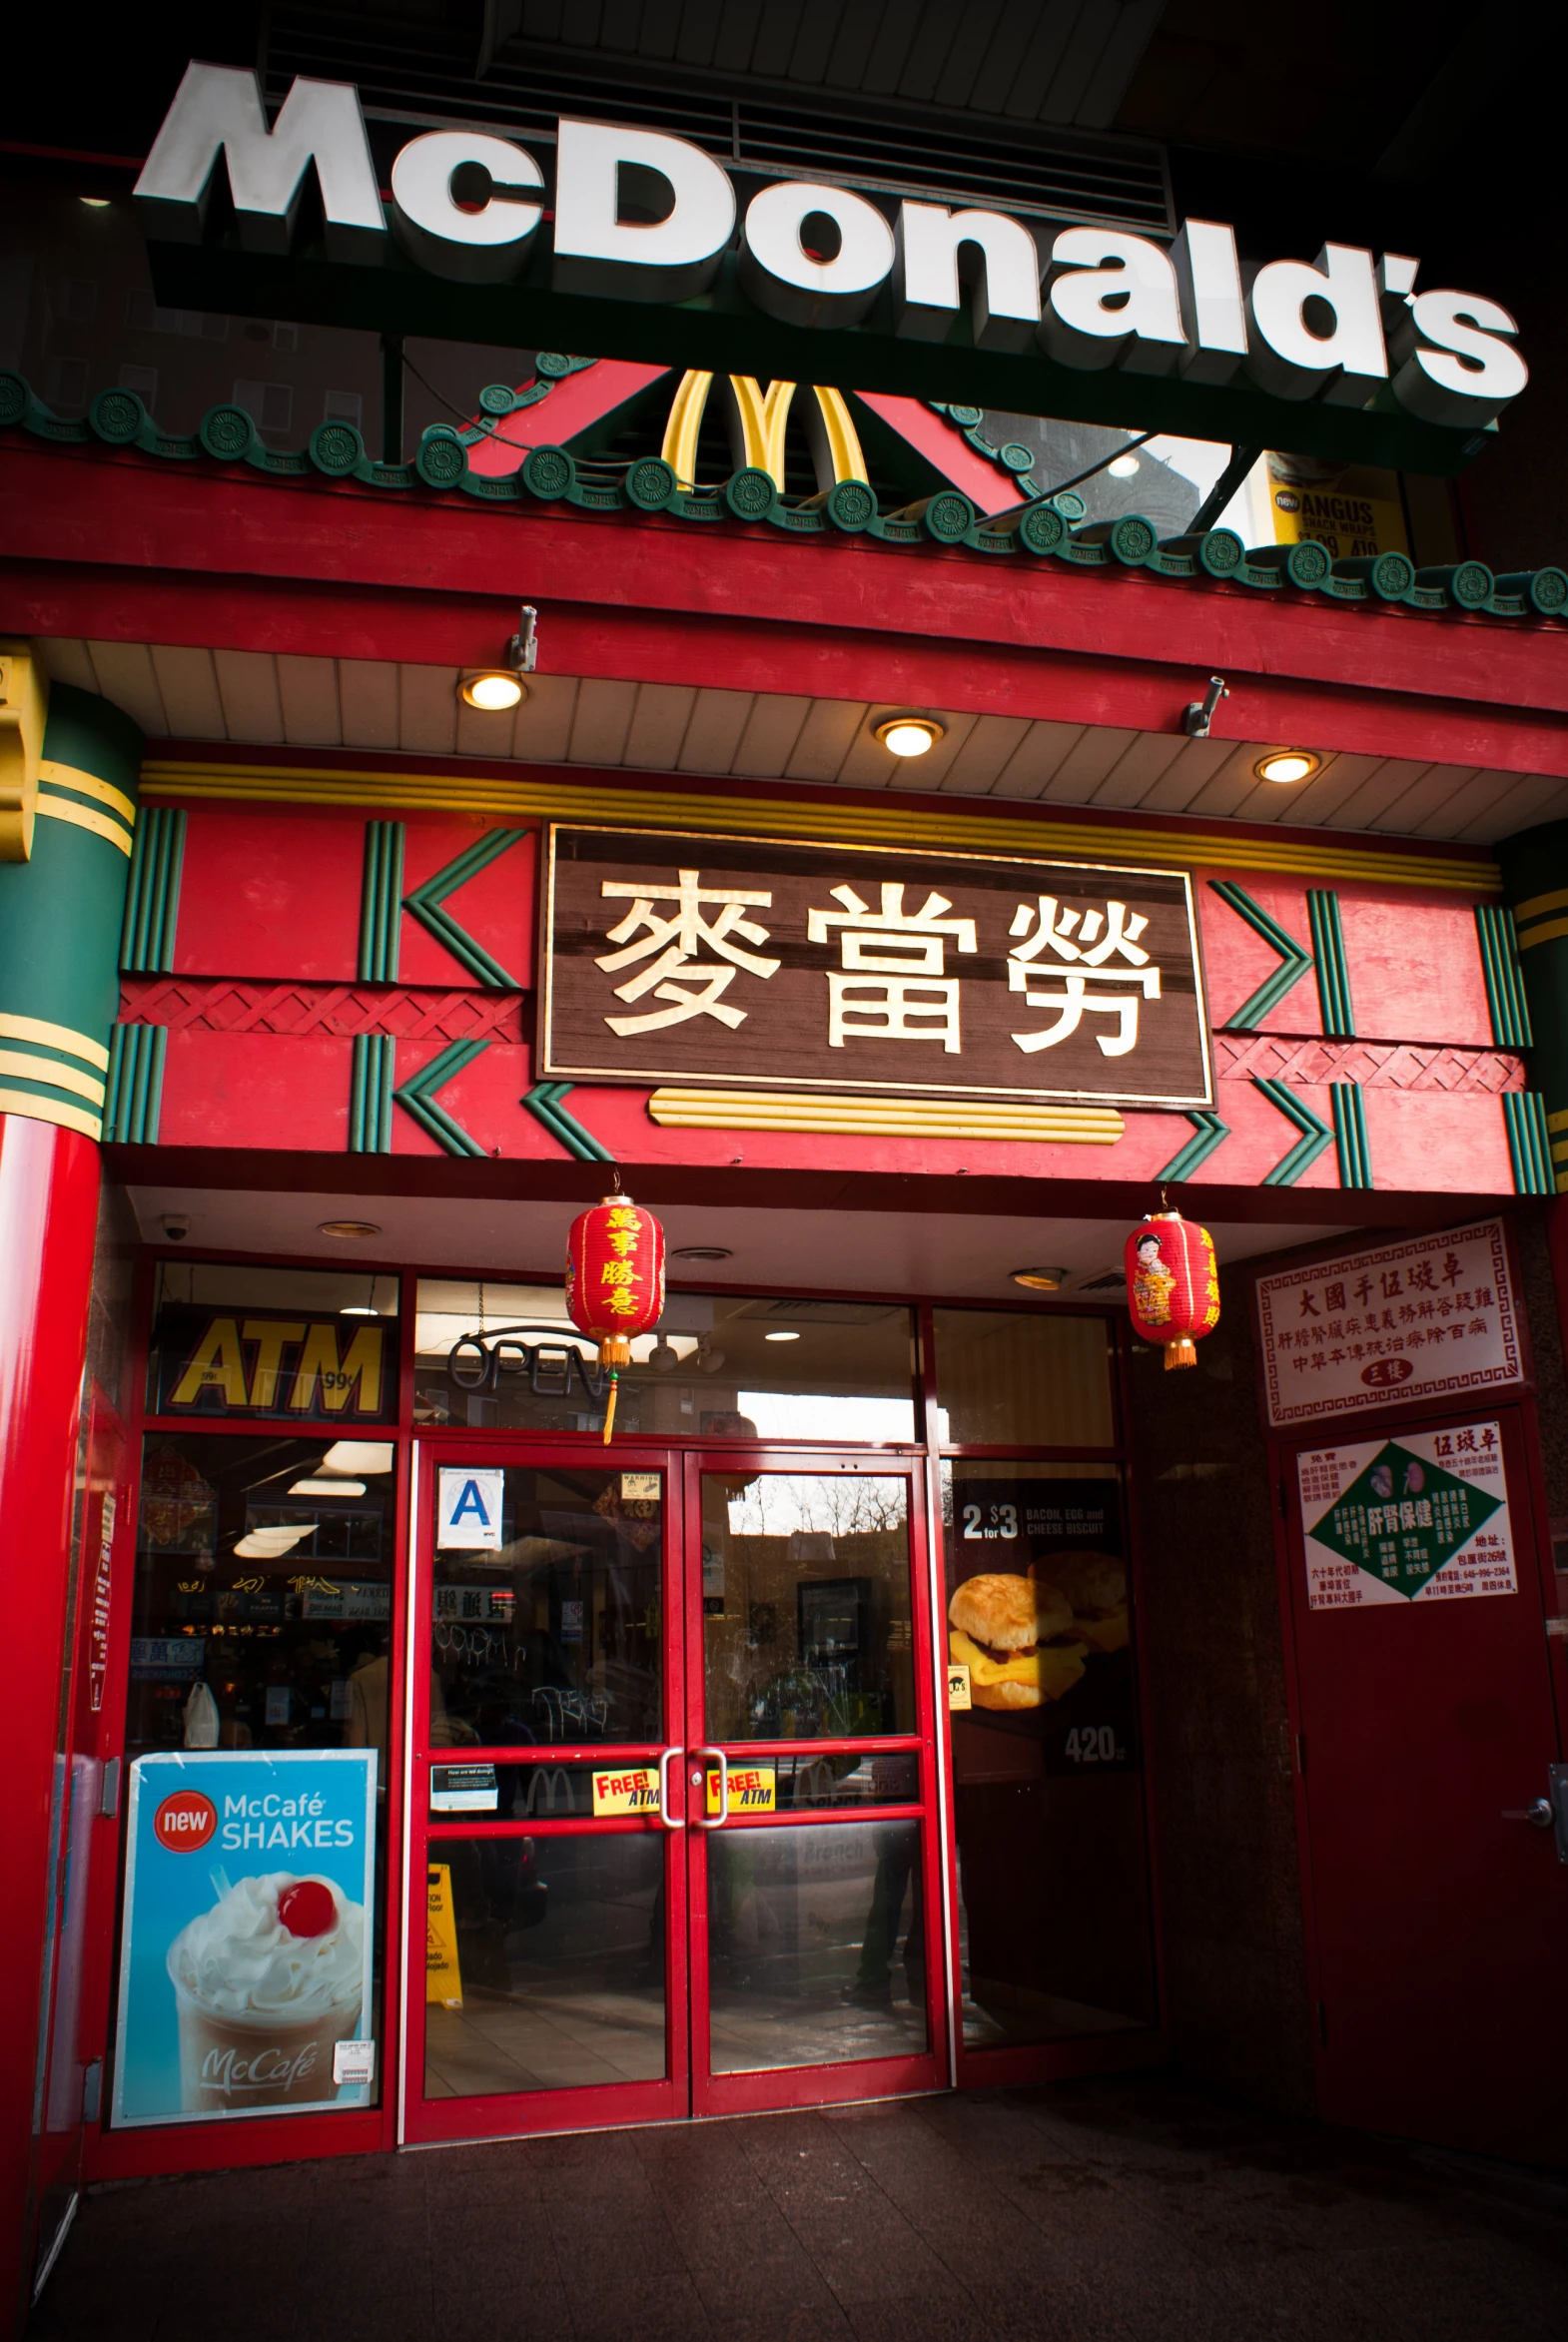 a mcdonald's front with signage and doors